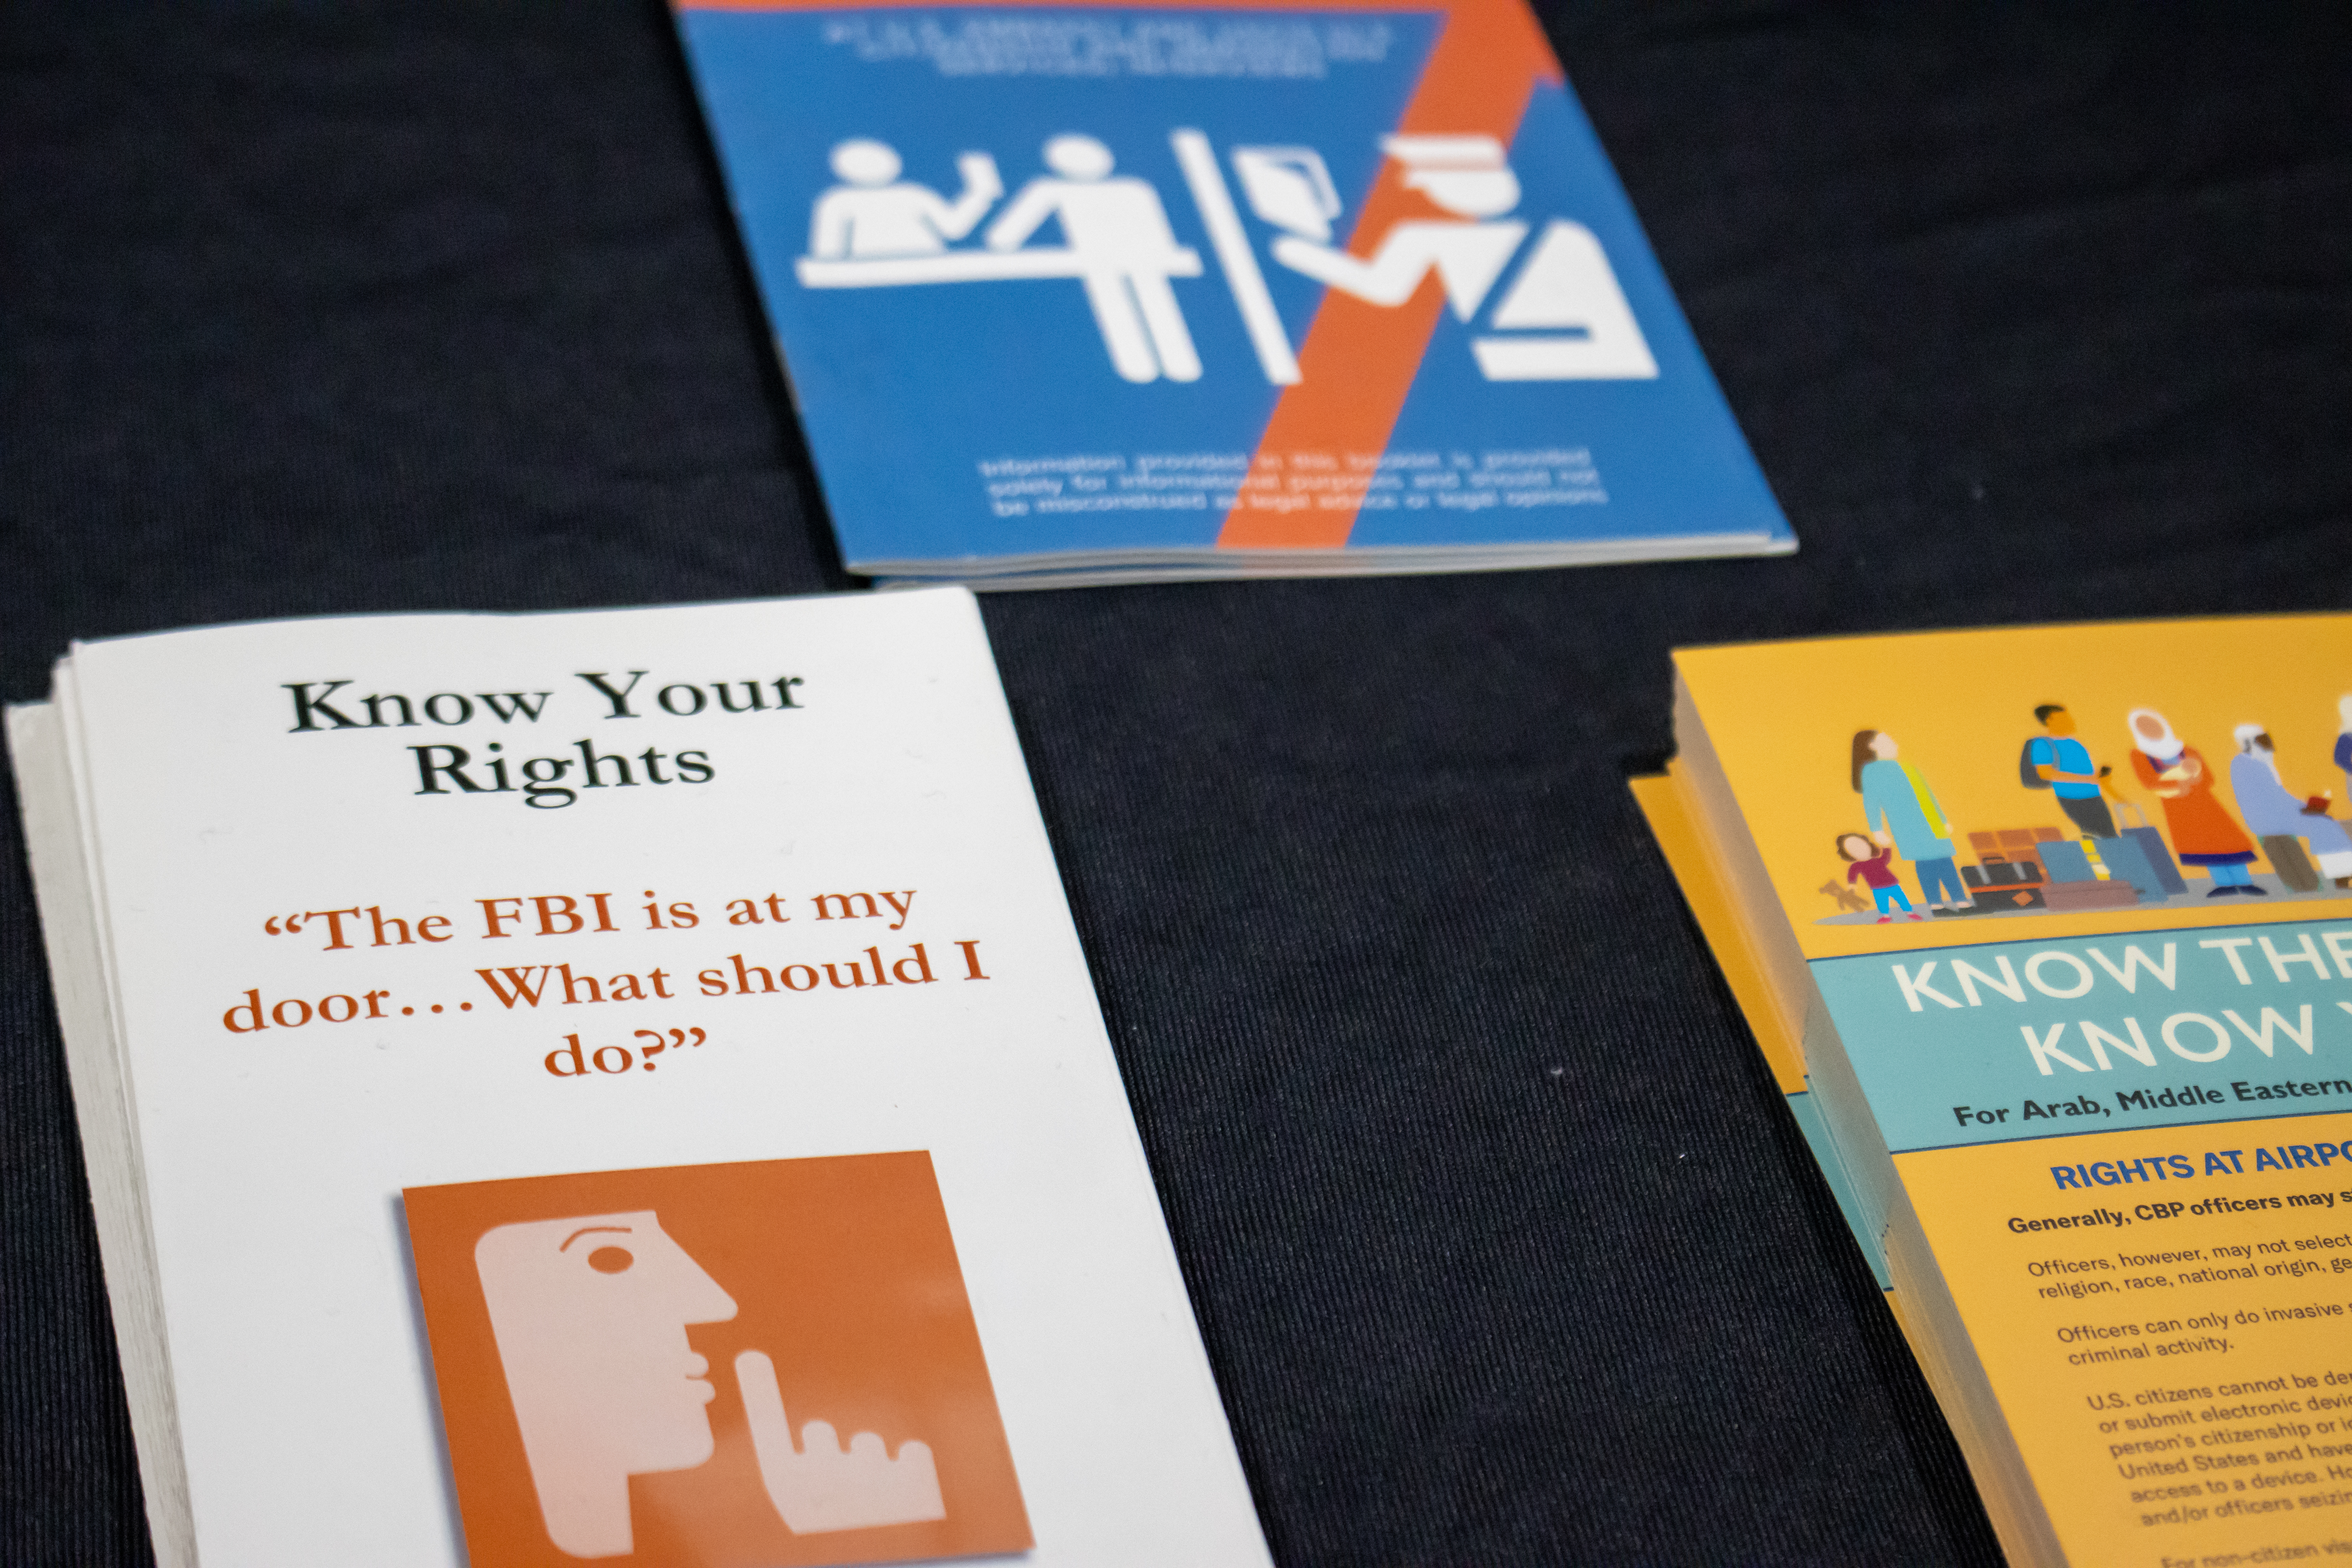 3 different brochures with 'know your rights' information are laid out on a table with a black background.